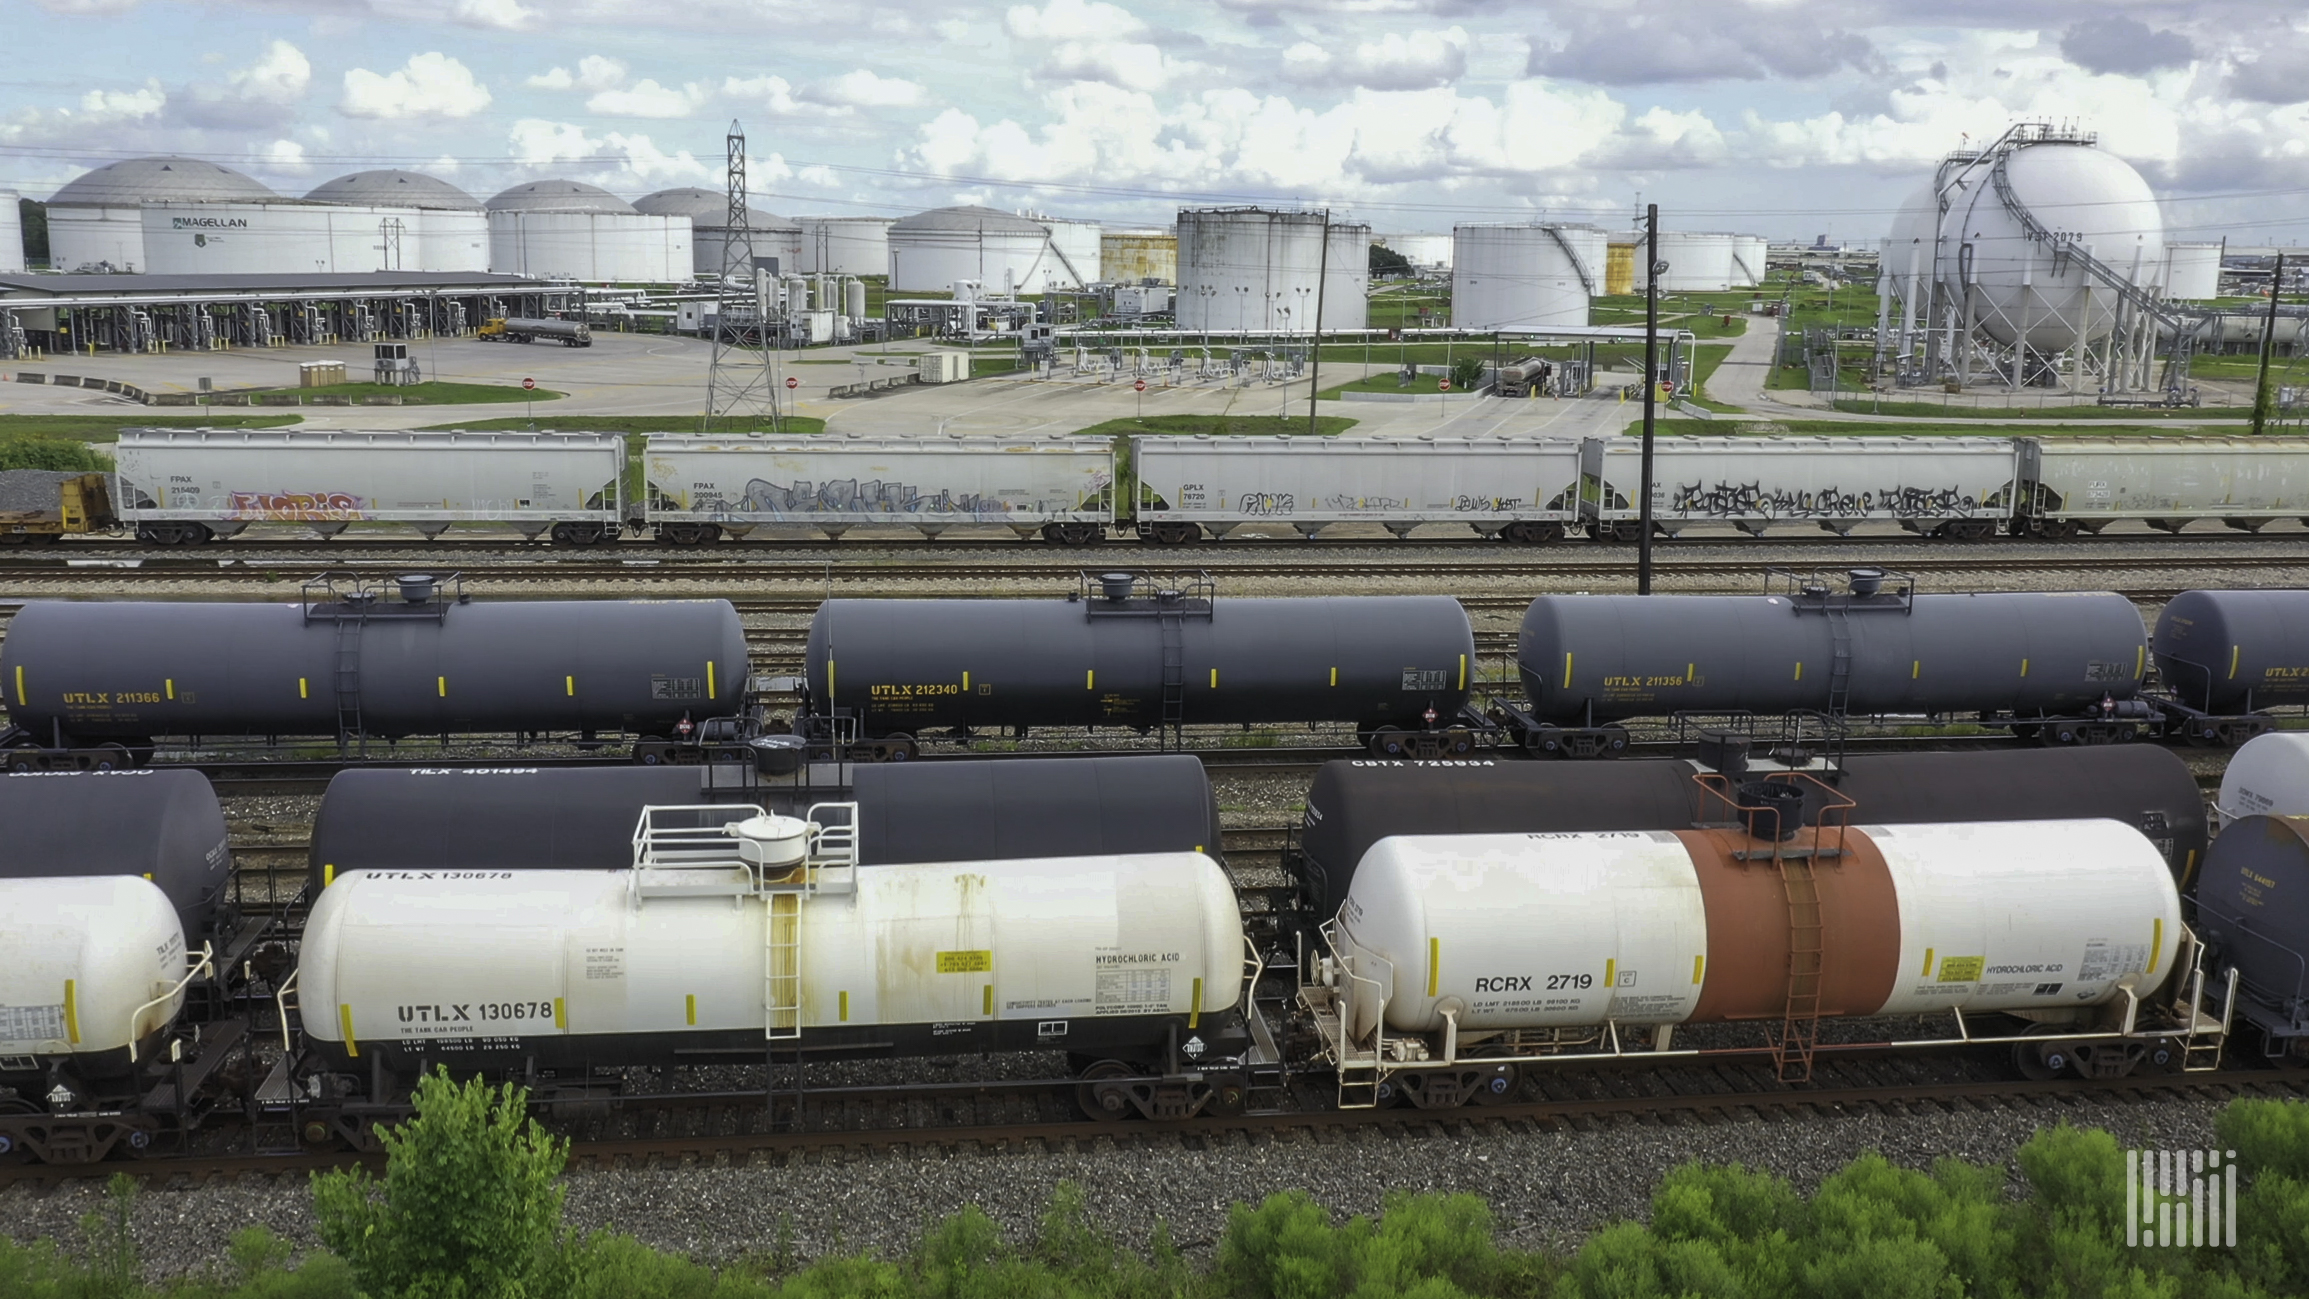 A photograph of tank cars parked in a rail yard.